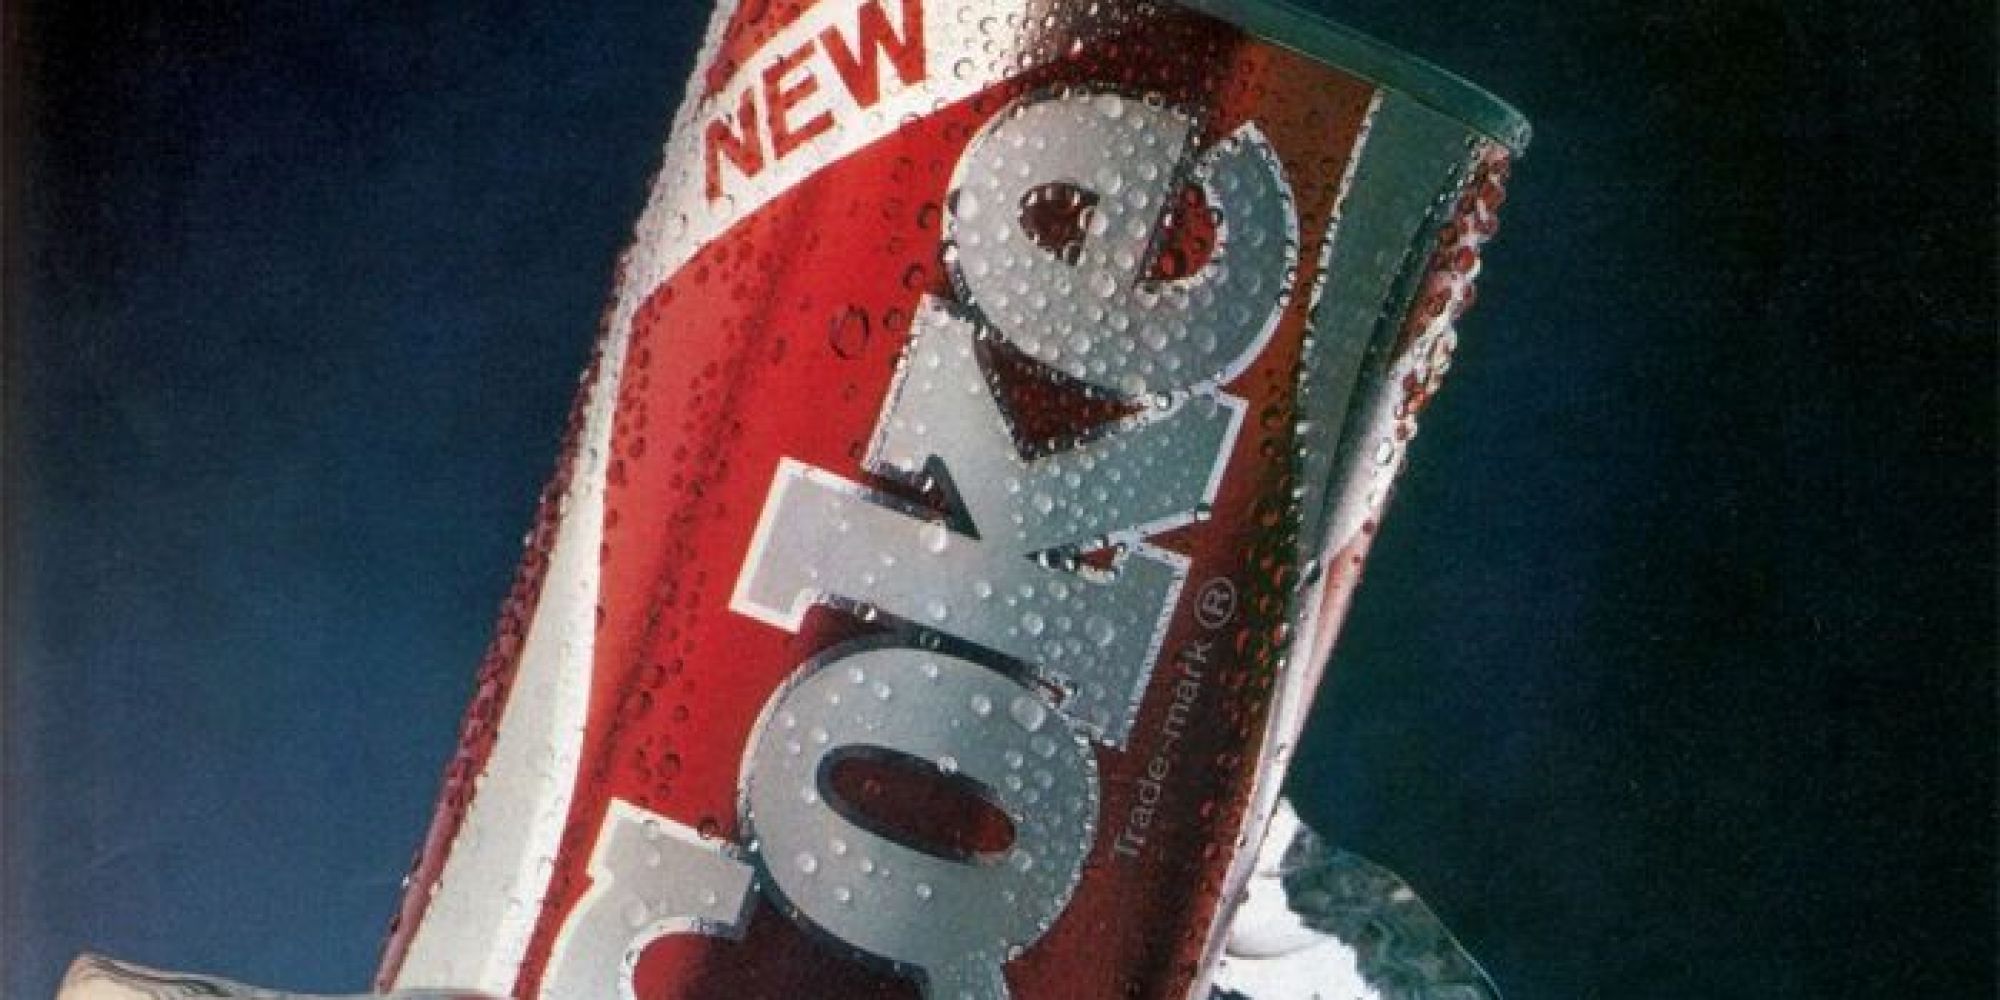 The Branding Mistake of The New Coke